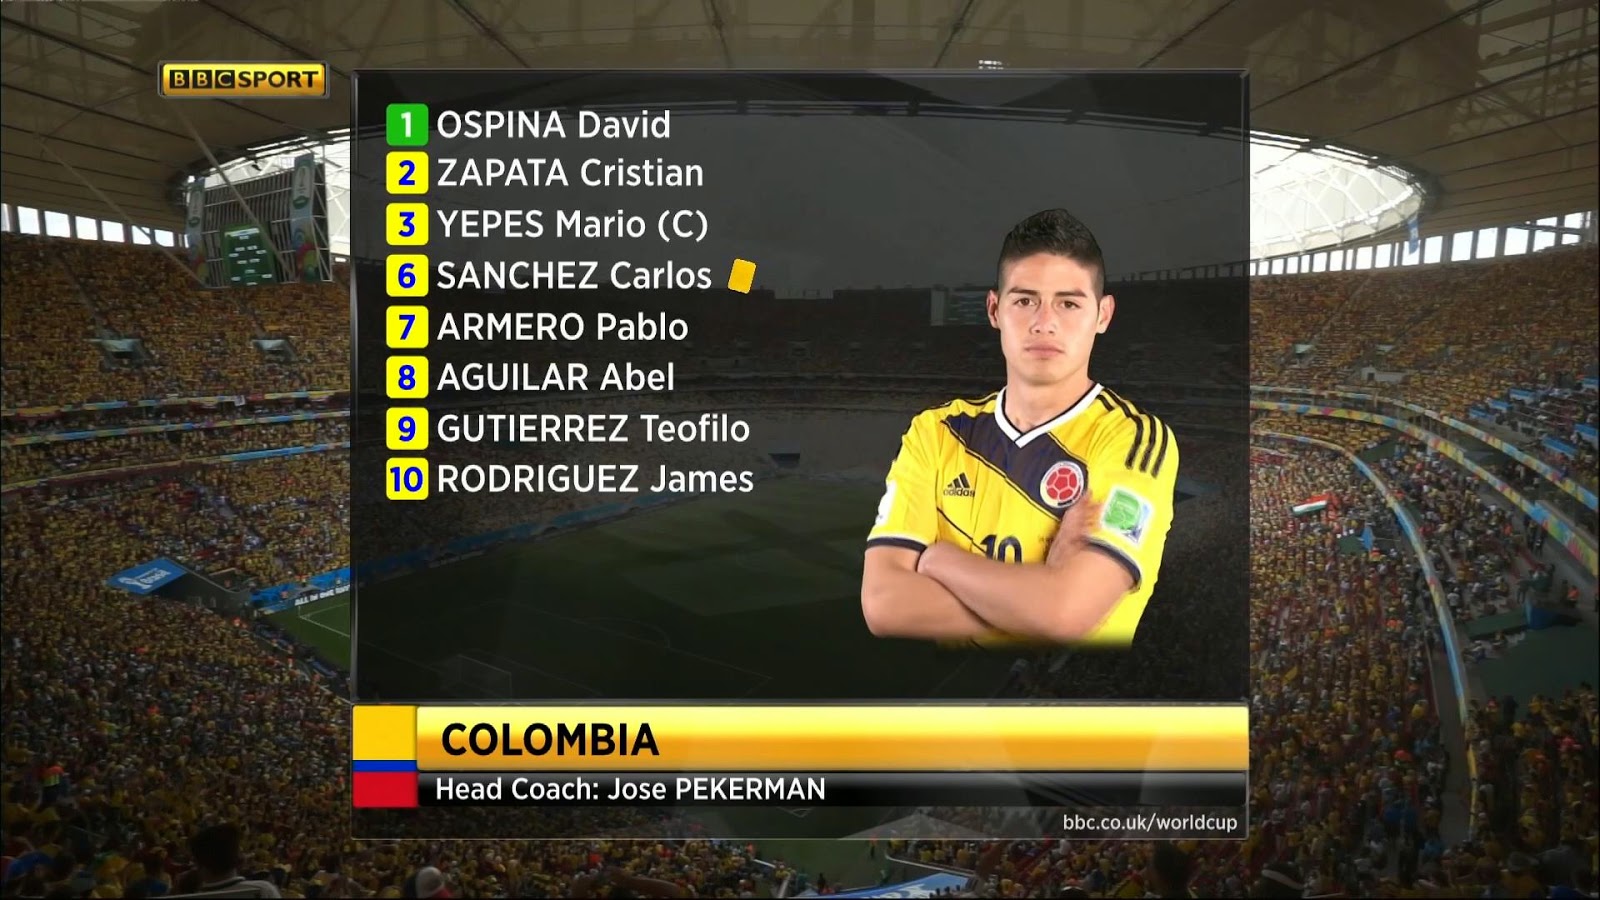 Colombia-CotI.jpg